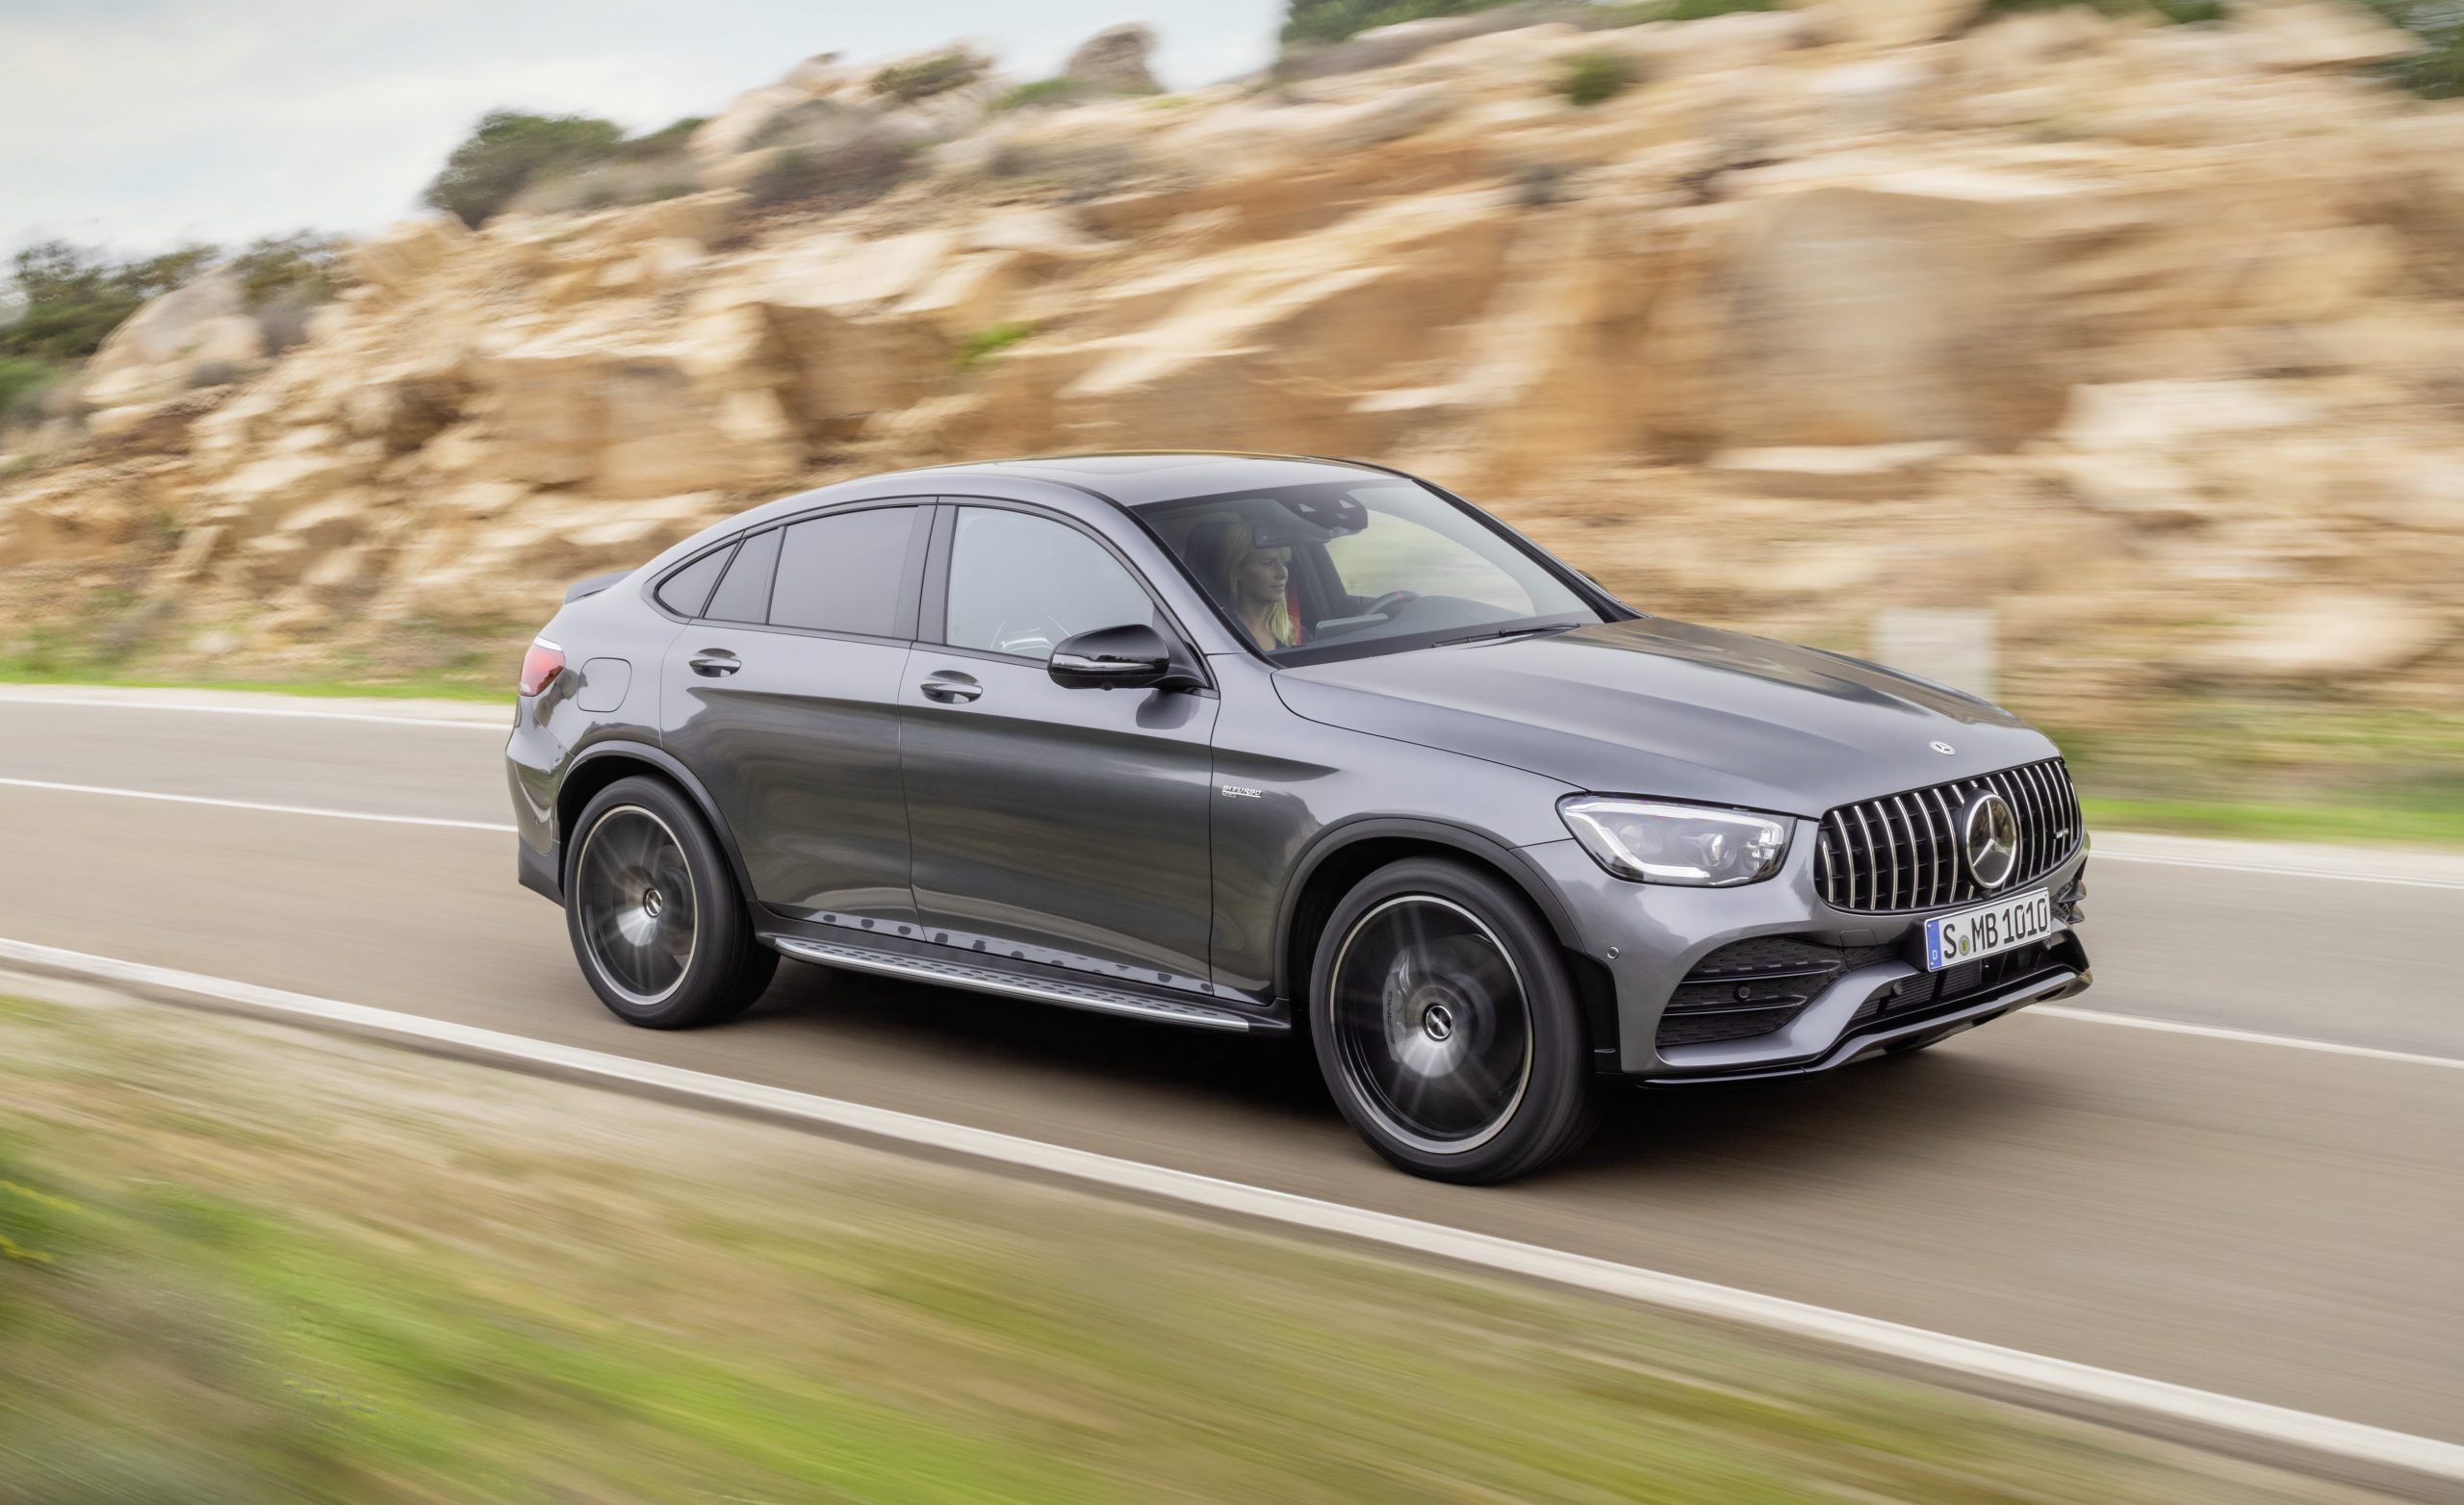 Mercedes-AMG GLC43 Selling prices